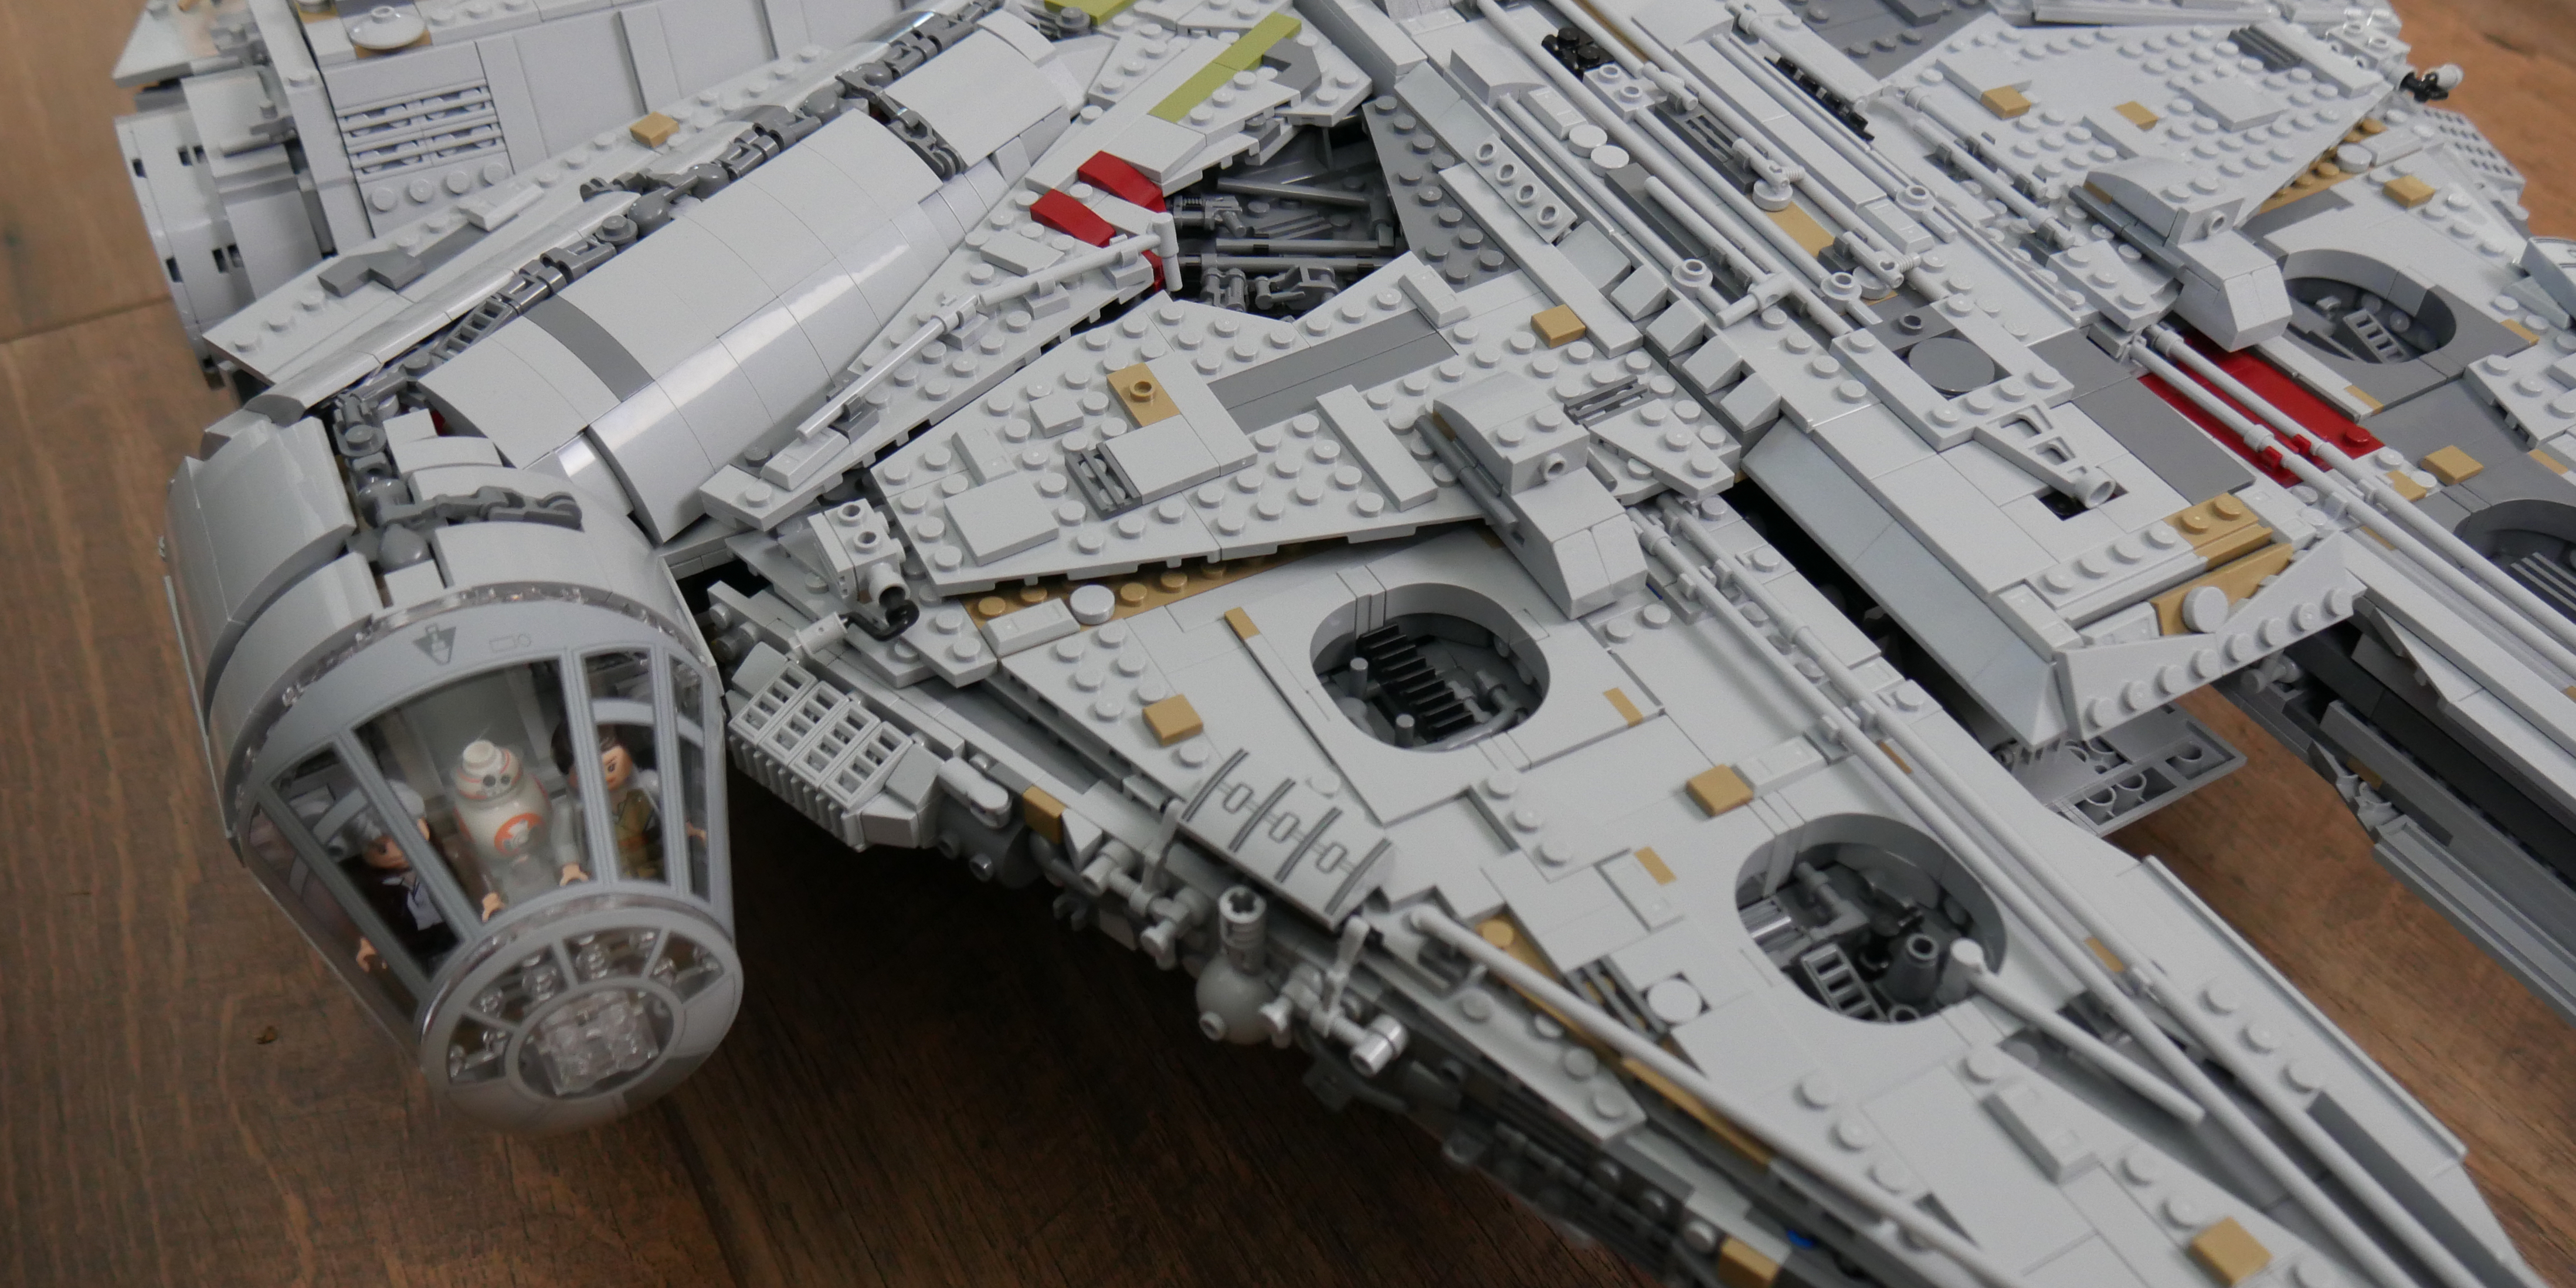 Lego Ucs Millennium Falcon Hands On Look 9to5toys